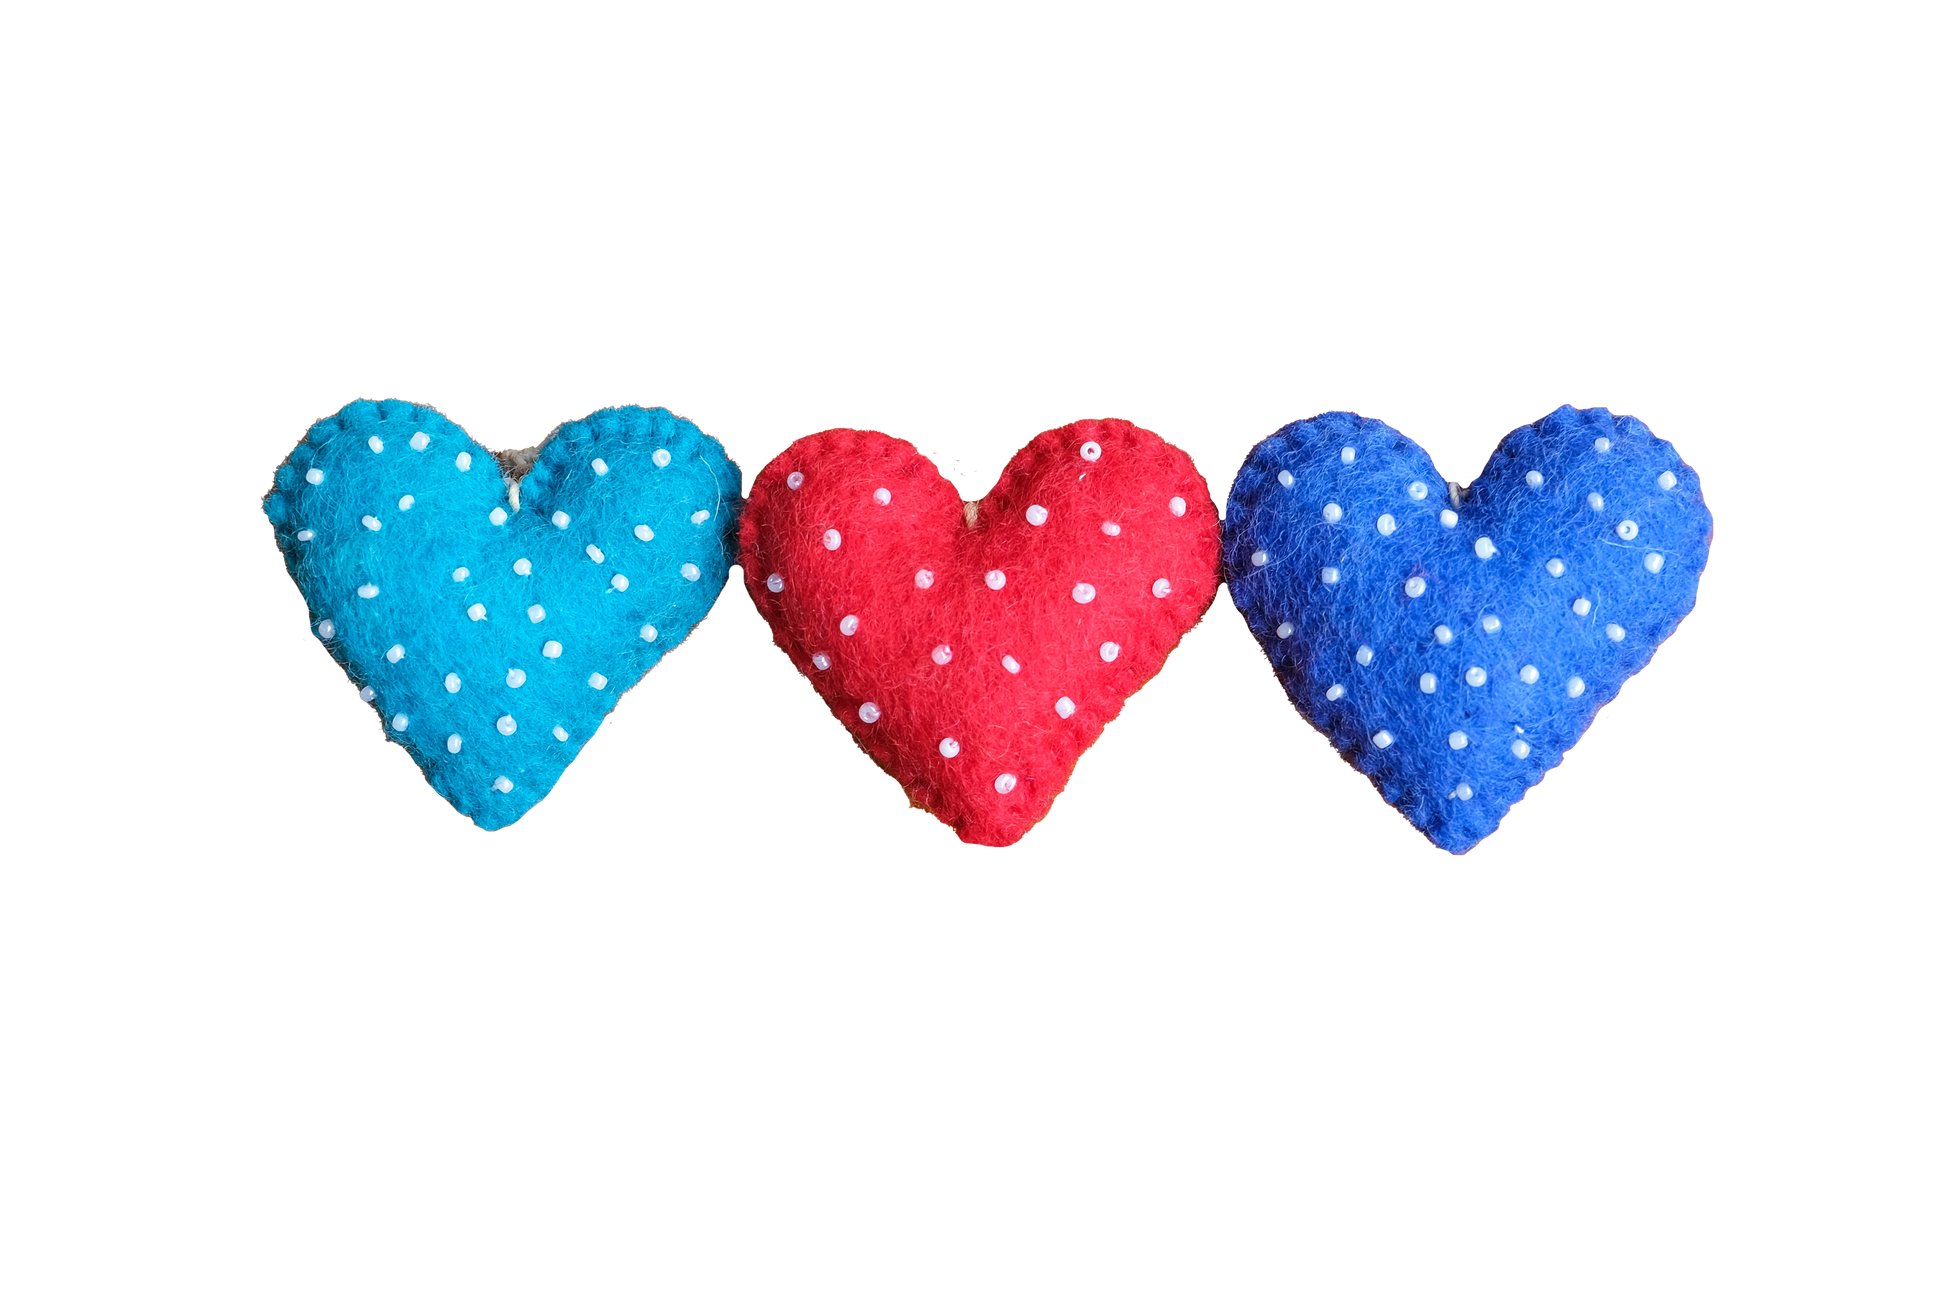 This Global Groove Life, handmade, ethical, fair trade, eco-friendly, sustainable, red and blue with white bead heart ornament set was created by artisans in Kathmandu Nepal and will be a colorful and fun addition to your Christmas tree this holiday season.